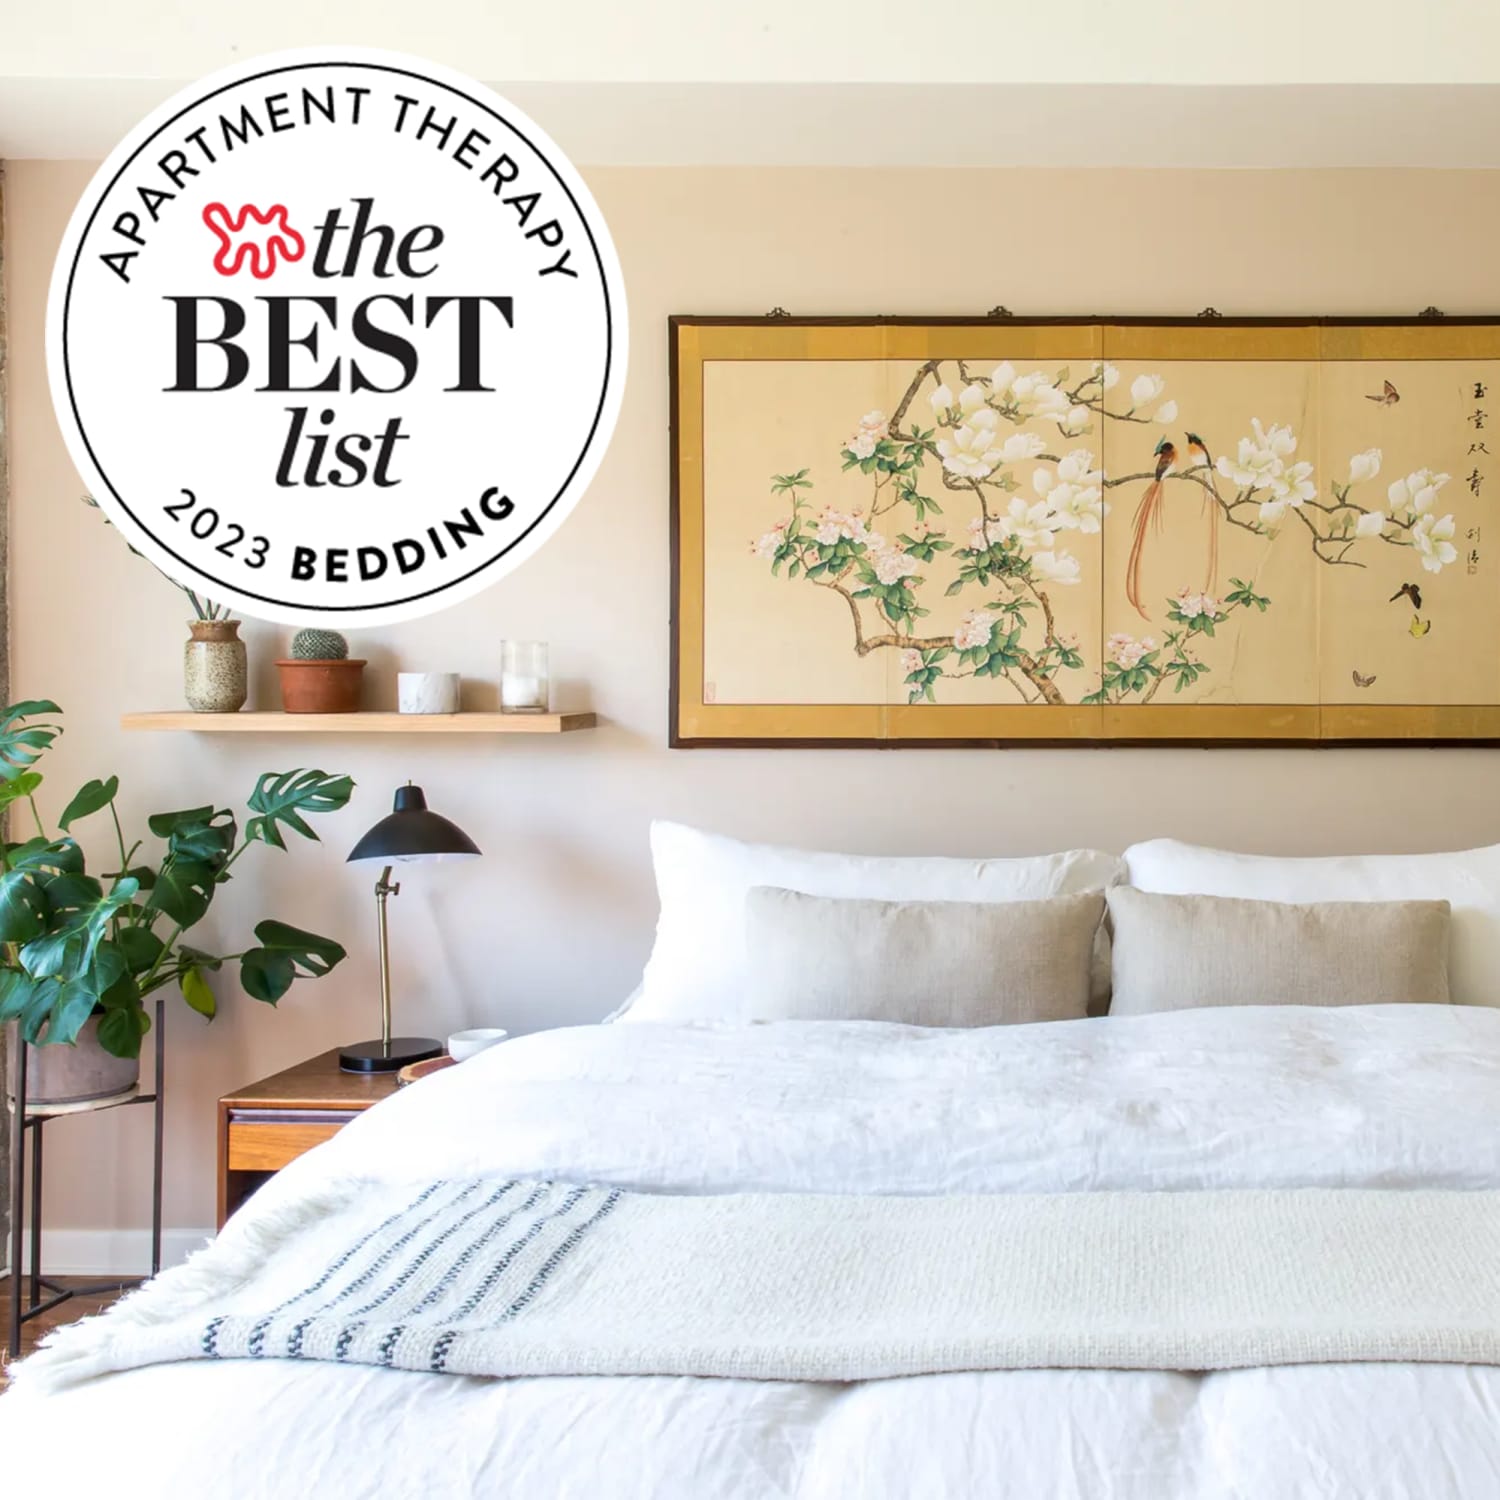 19 Best Sheets on , Tested and Reviewed (2023)